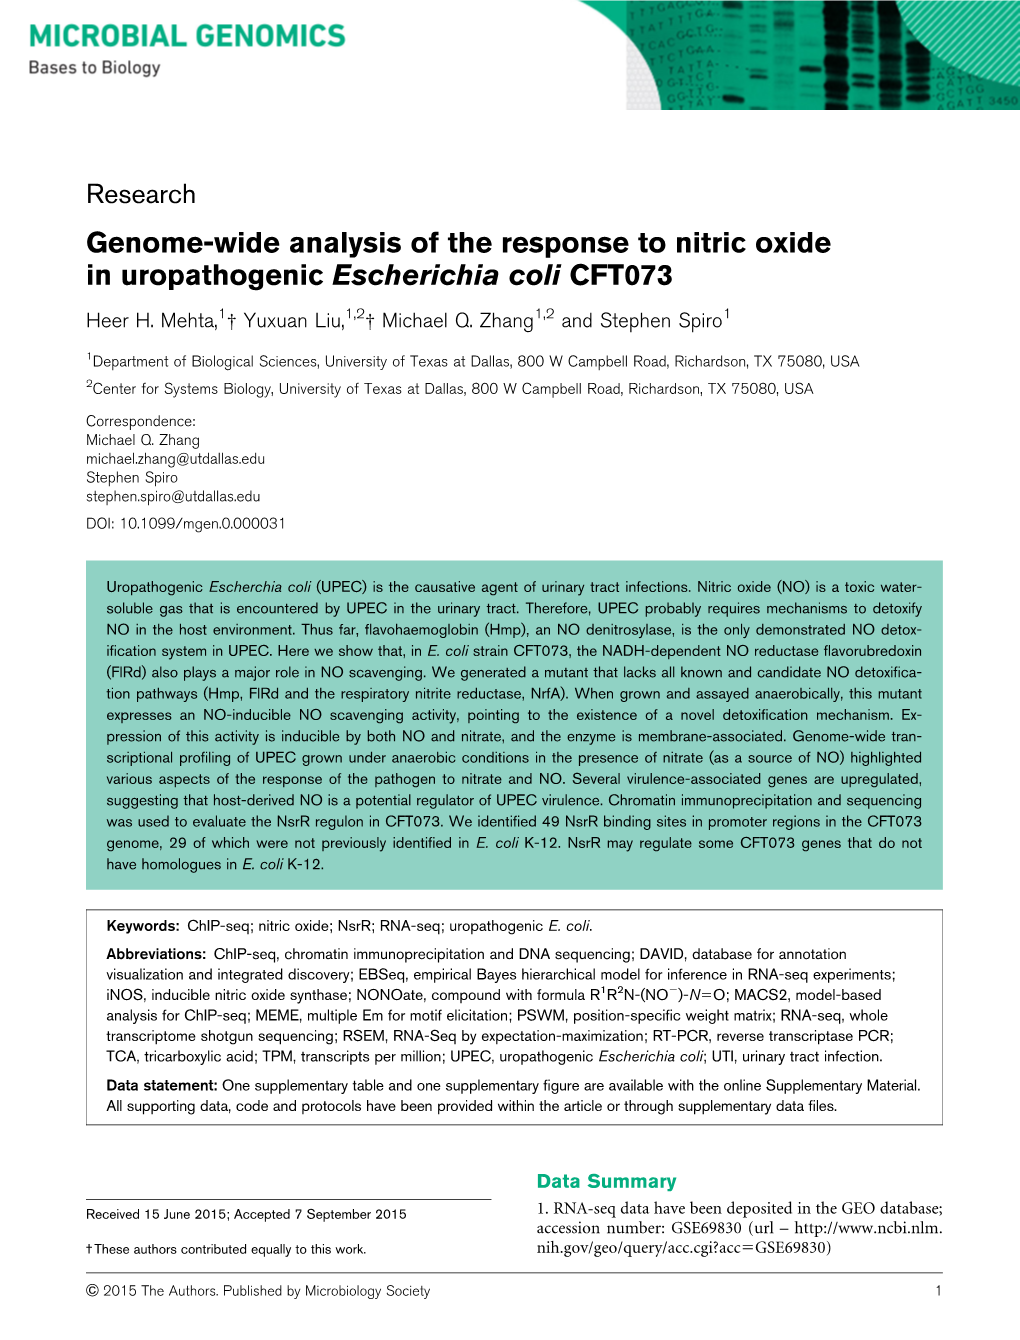 Genome-Wide Analysis of the Response to Nitric Oxide in Uropathogenic Escherichia Coli CFT073